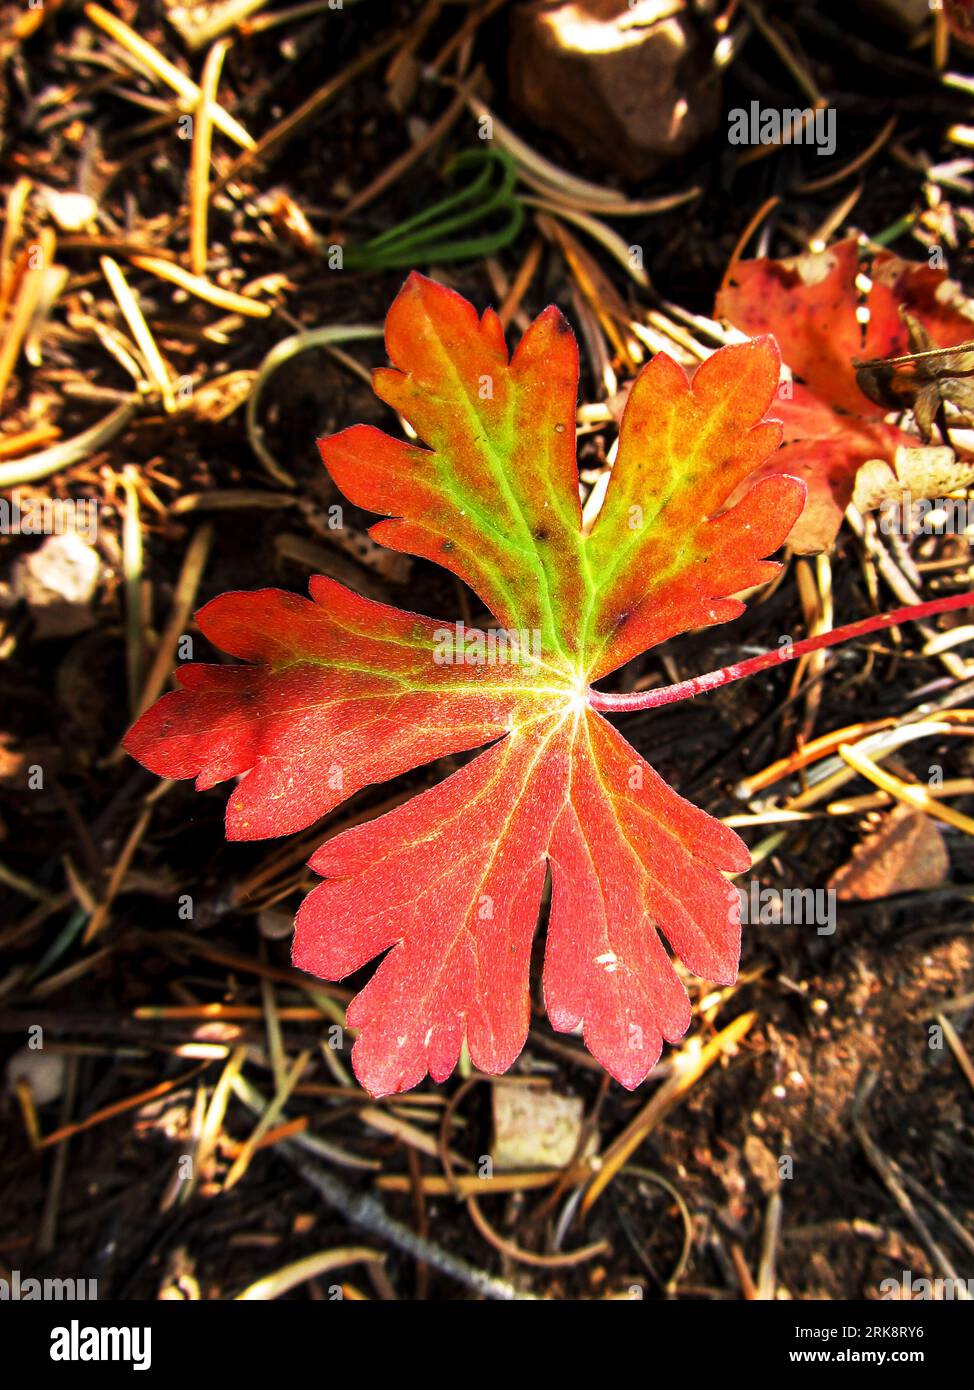 A single red autumn colored leaf with green Veins in the undergrowth of the pine woodlands in Bryce Canyon National Park, Utah Stock Photo